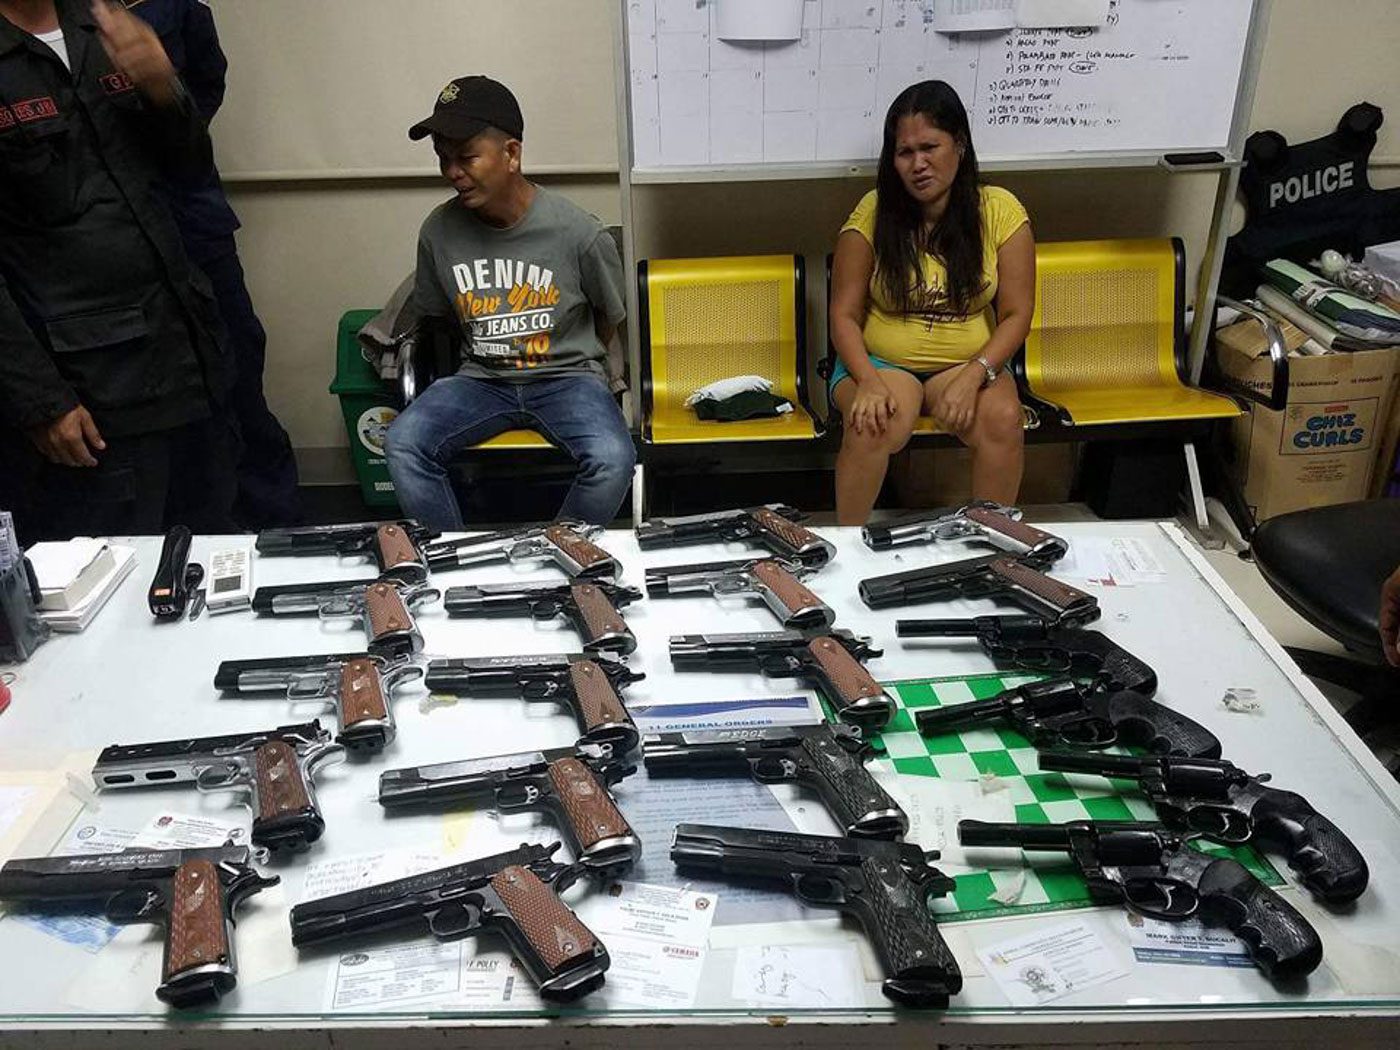 Siblings arrested for attempting to smuggle 21 guns through Cebu port